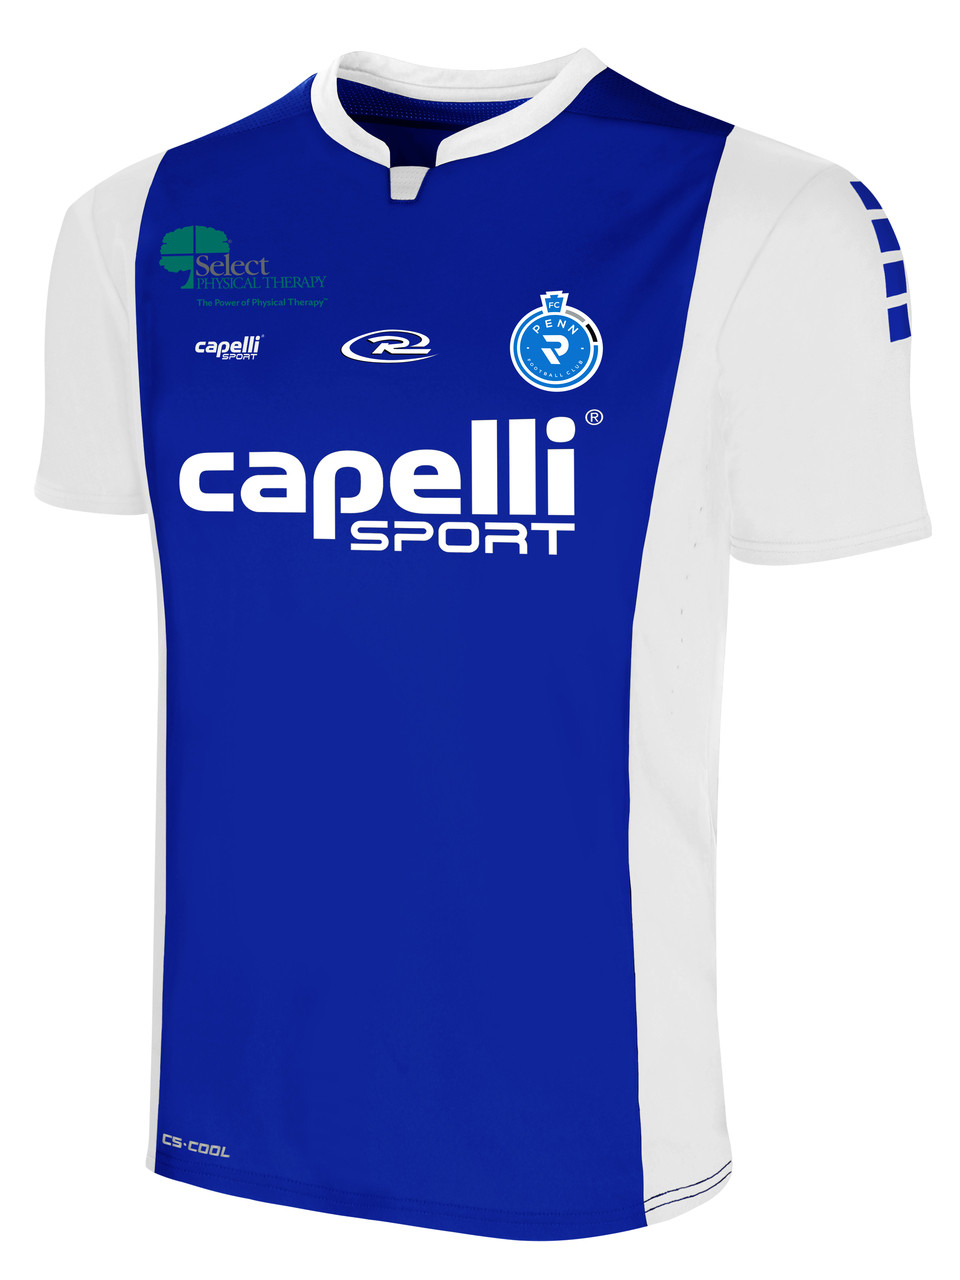 royal blue and white jersey